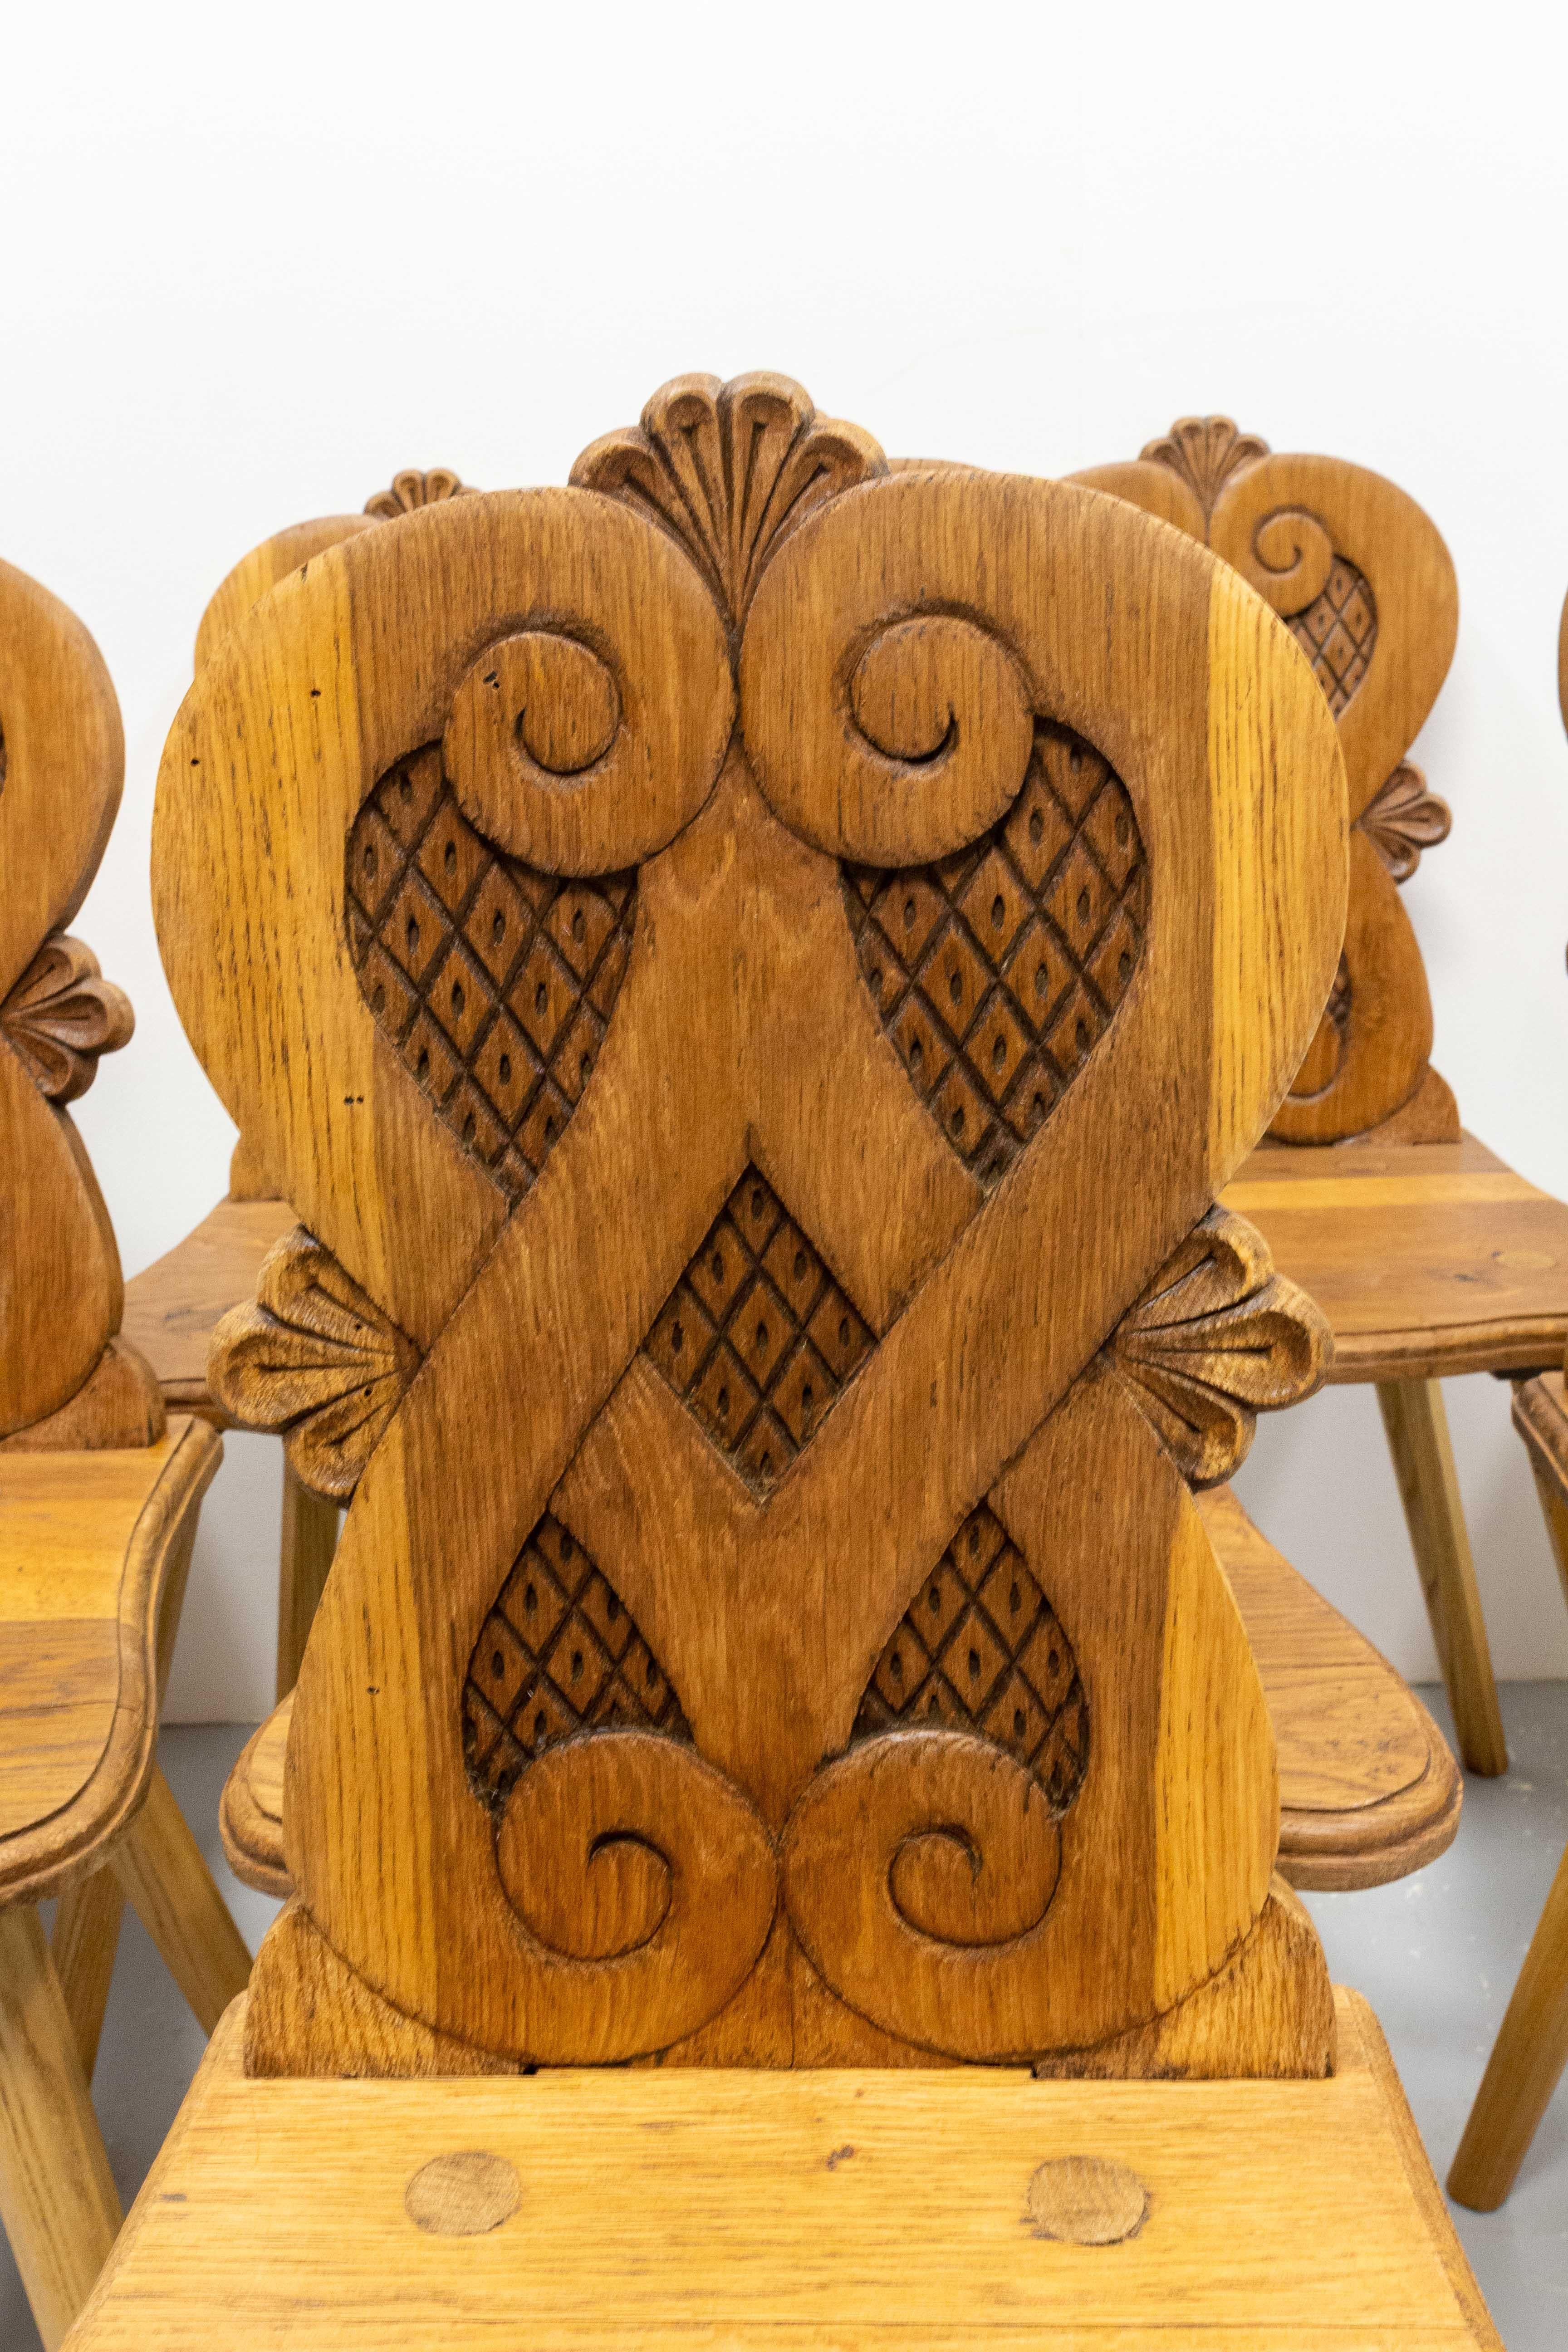 Pair Dining Chairs Swiss Alp Escabelles Oak Brutalist Style, French, Late 19th C For Sale 3